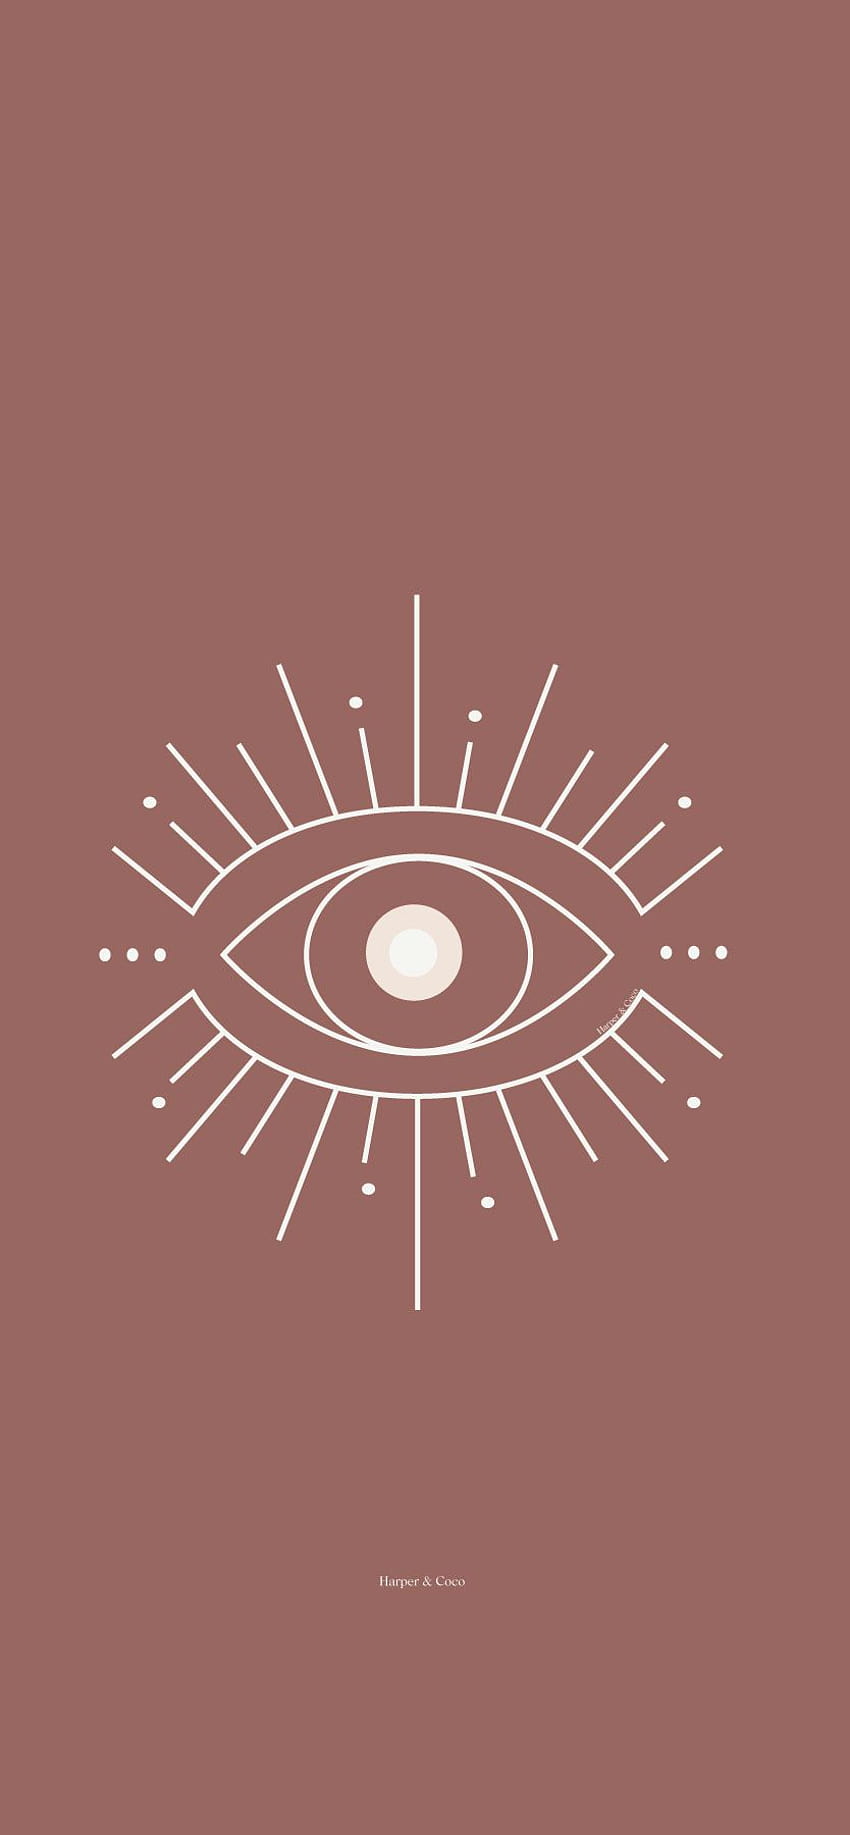 The all seeing eye on a brown background - Terracotta